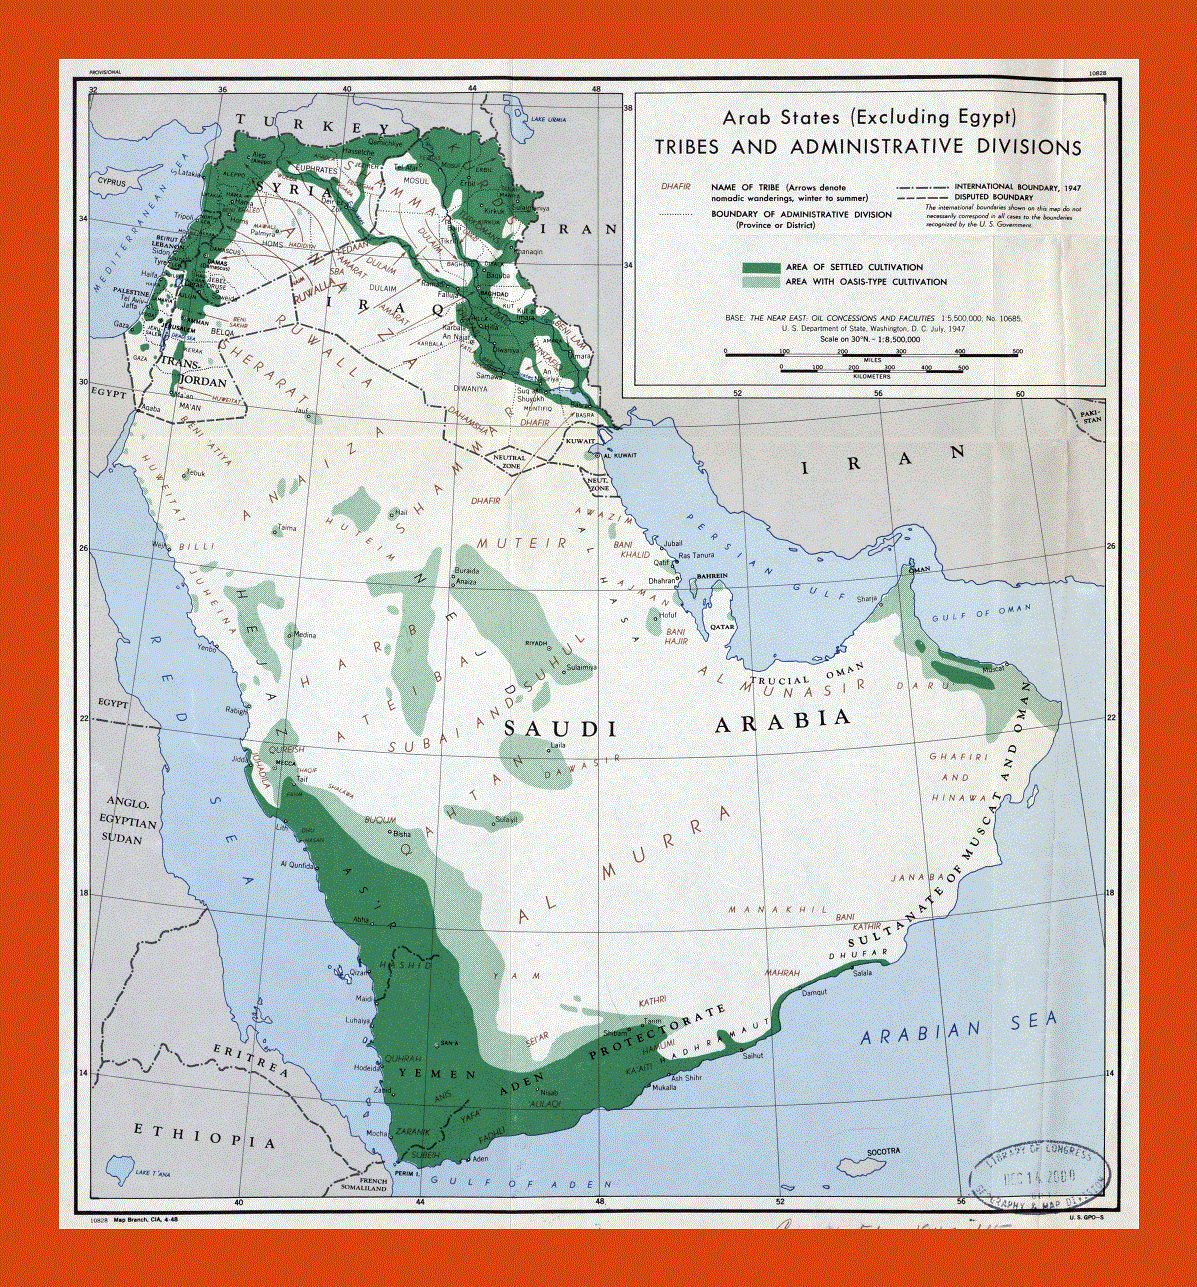 Arab States (Excluding Egypt) tribes and administrative divisions map - 1947